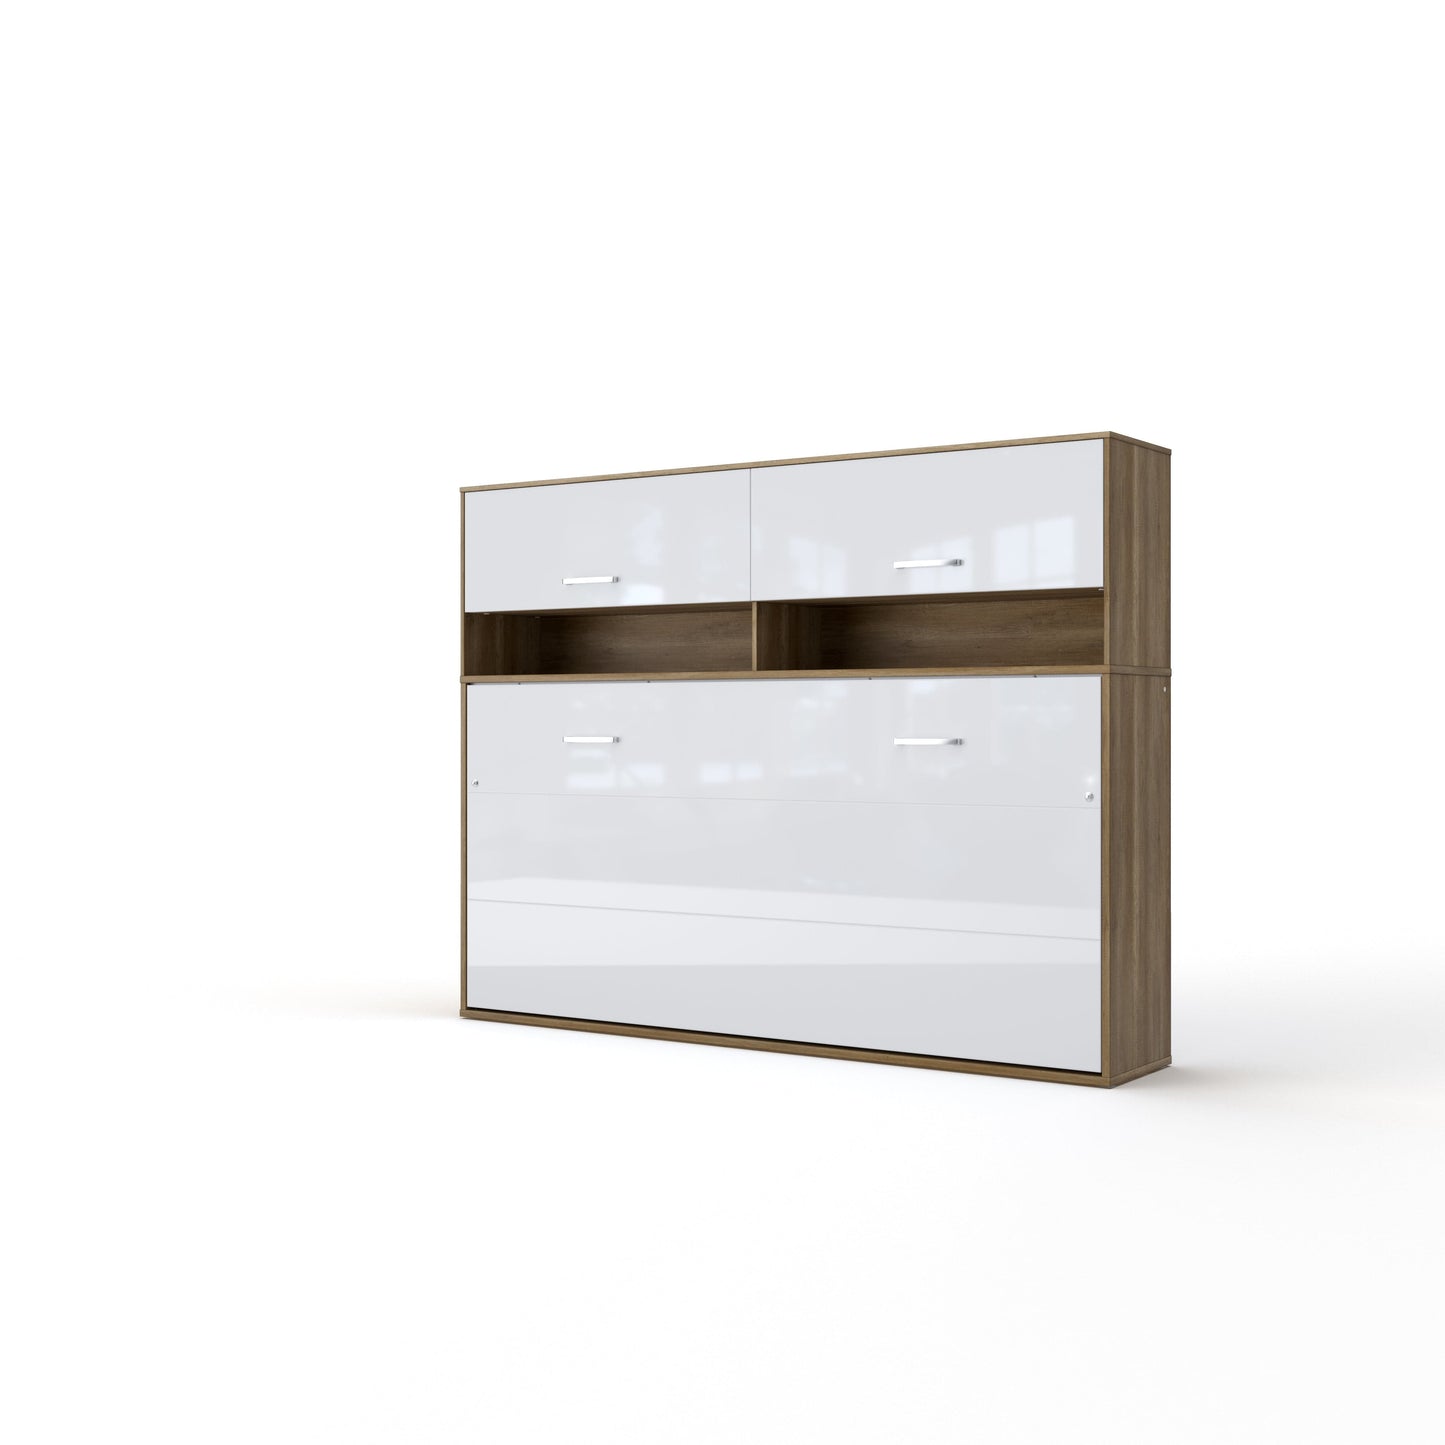 Invento Horizontal Wall Bed, European Full XL Size with a cabinet on top